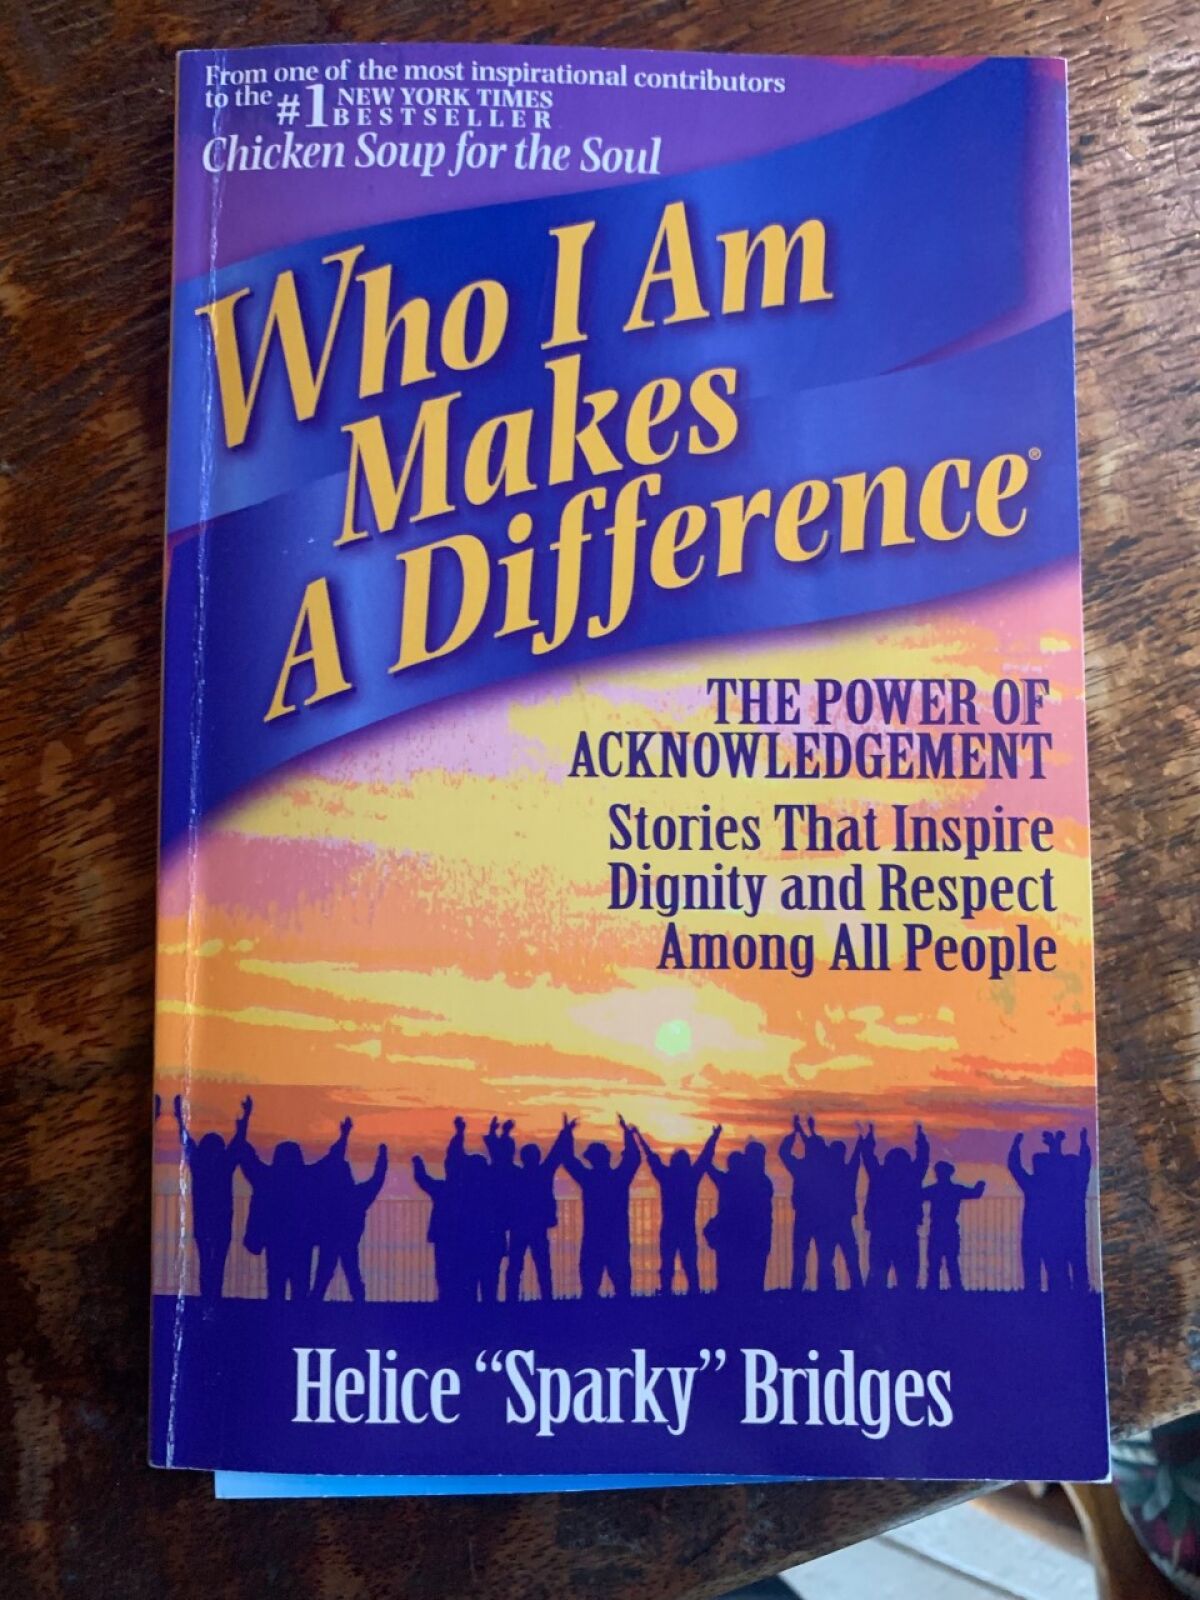 The cover of “Who I am Makes a Difference"